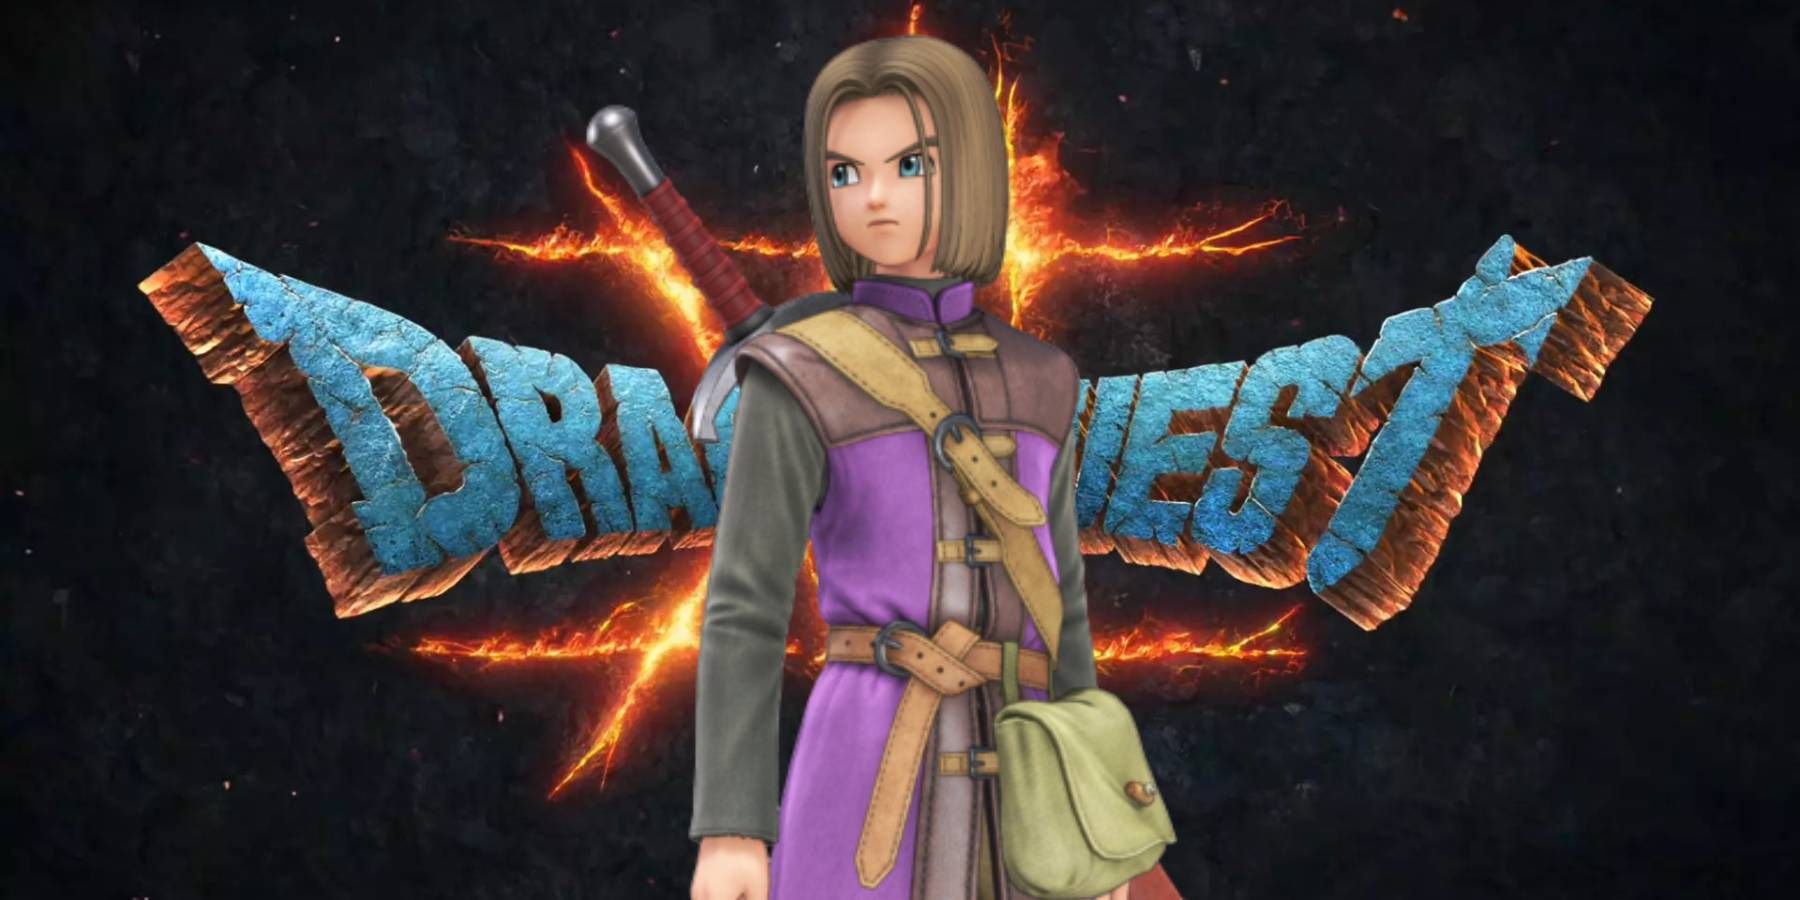 james 💧 on X: we've almost had 12 Dragon Quest games and there's not been  a single bad one so far. What's your favourite main series Dragon Quest  game? And favourite character